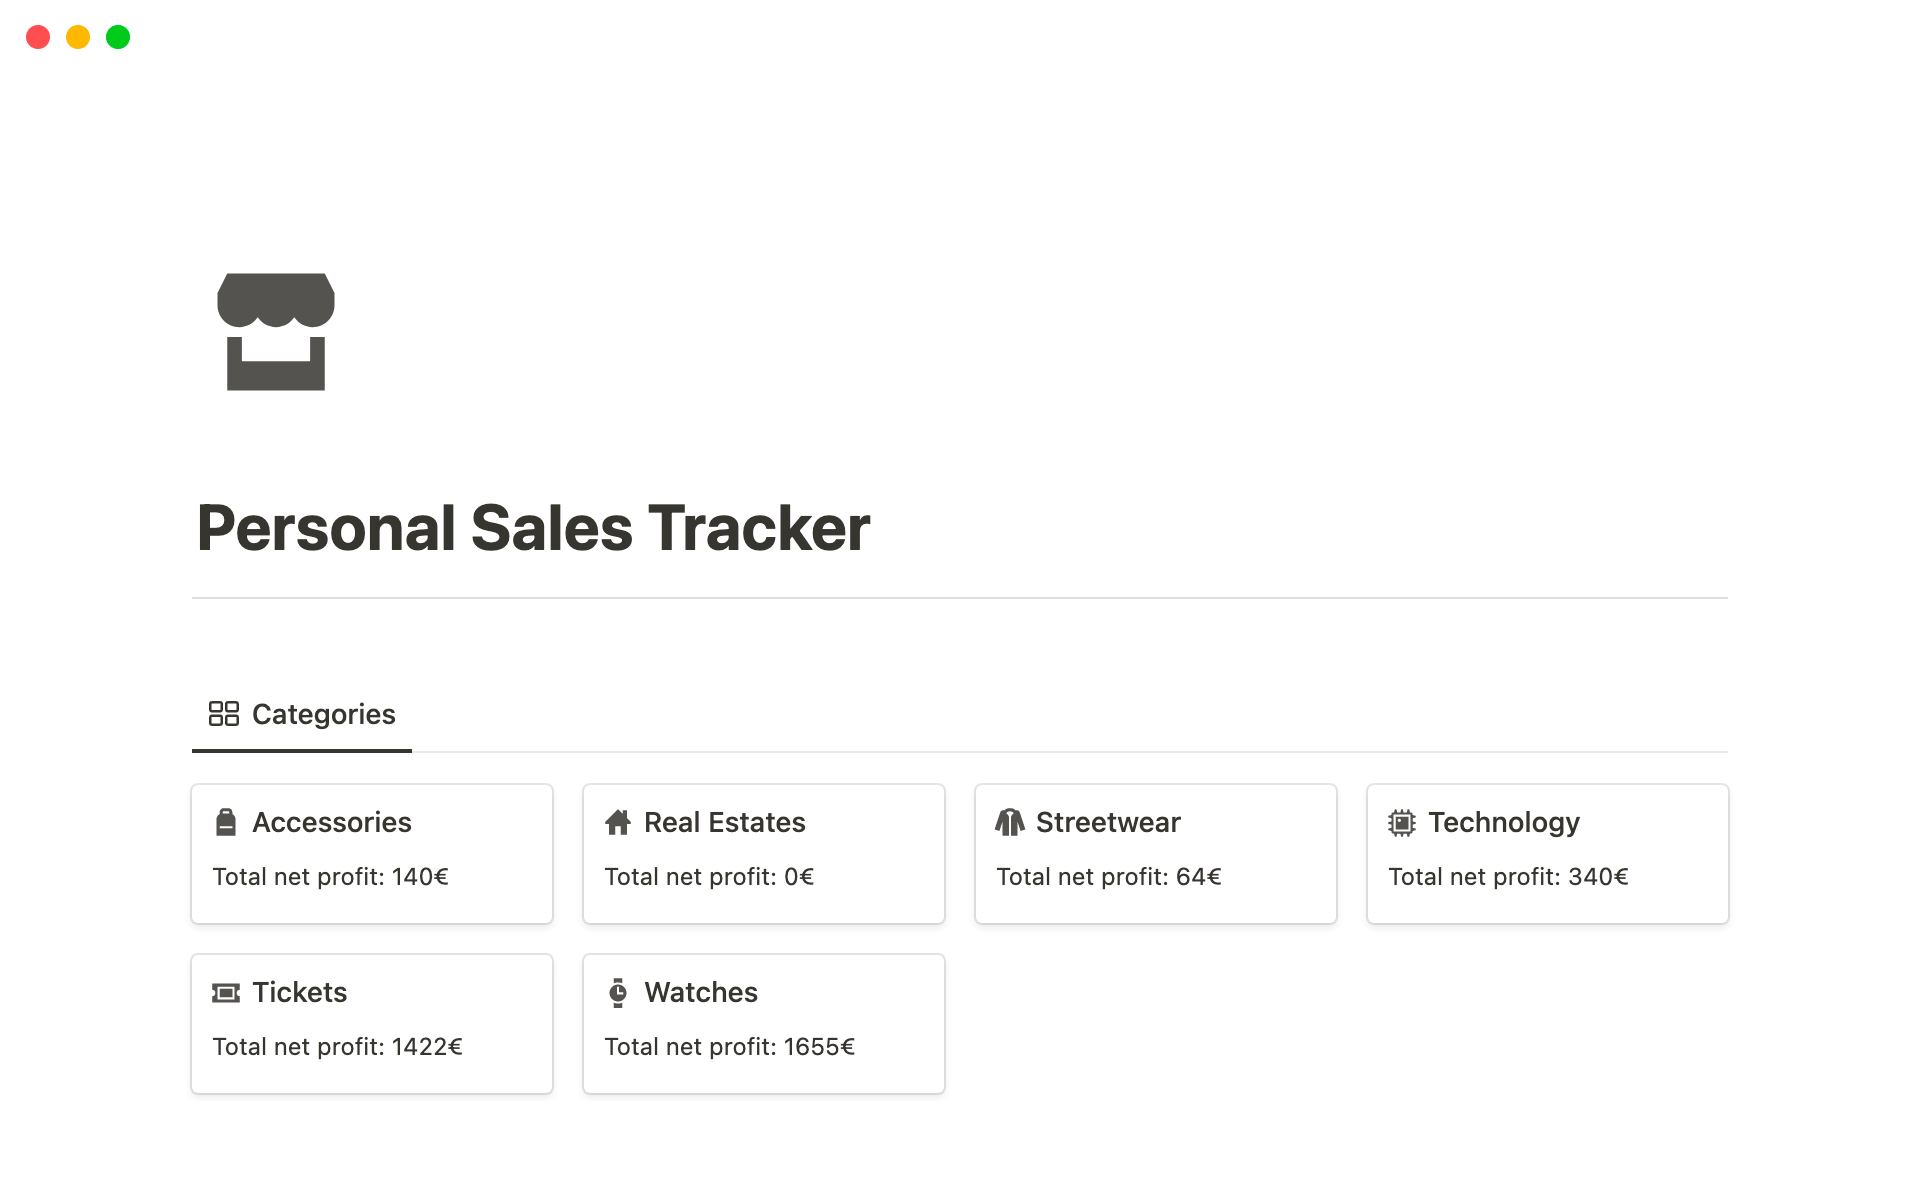 Whether you're a seasoned sales professional or just starting out in the world of selling, our Personal Sales Tracker Template is designed to simplify your sales management and boost your profitability.